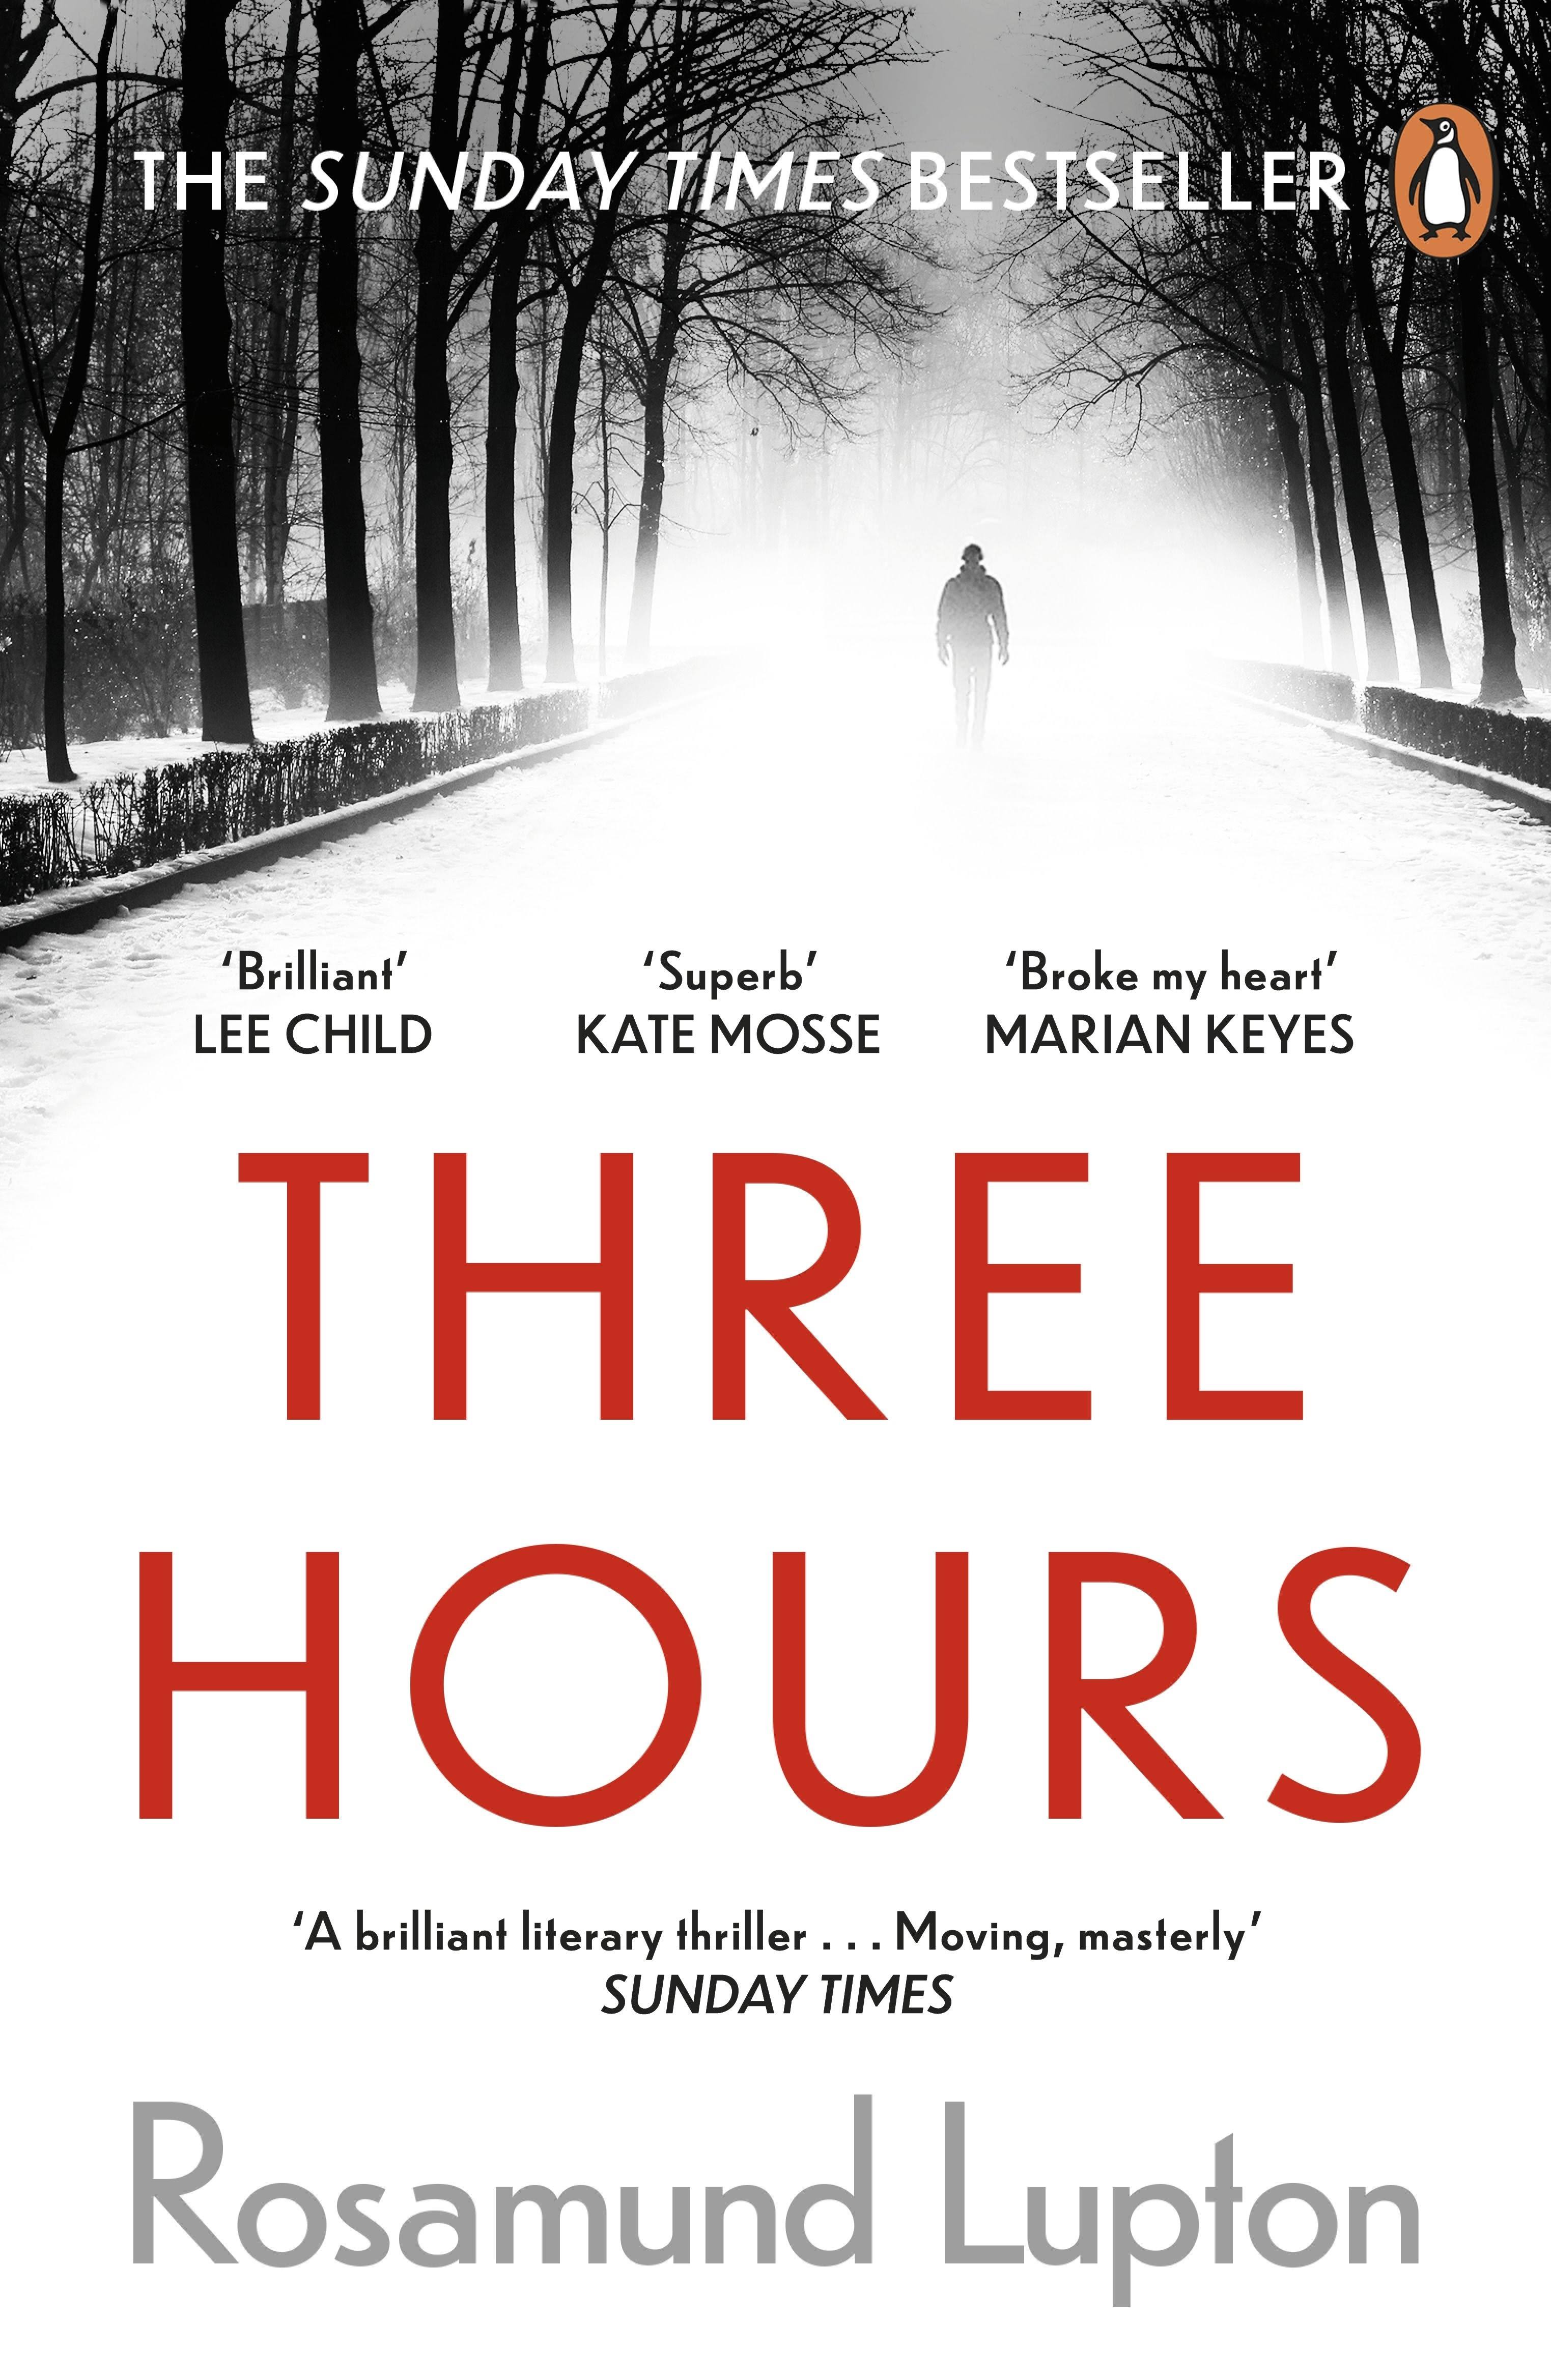 Three Hours - The Top Ten Sunday Times Bestseller